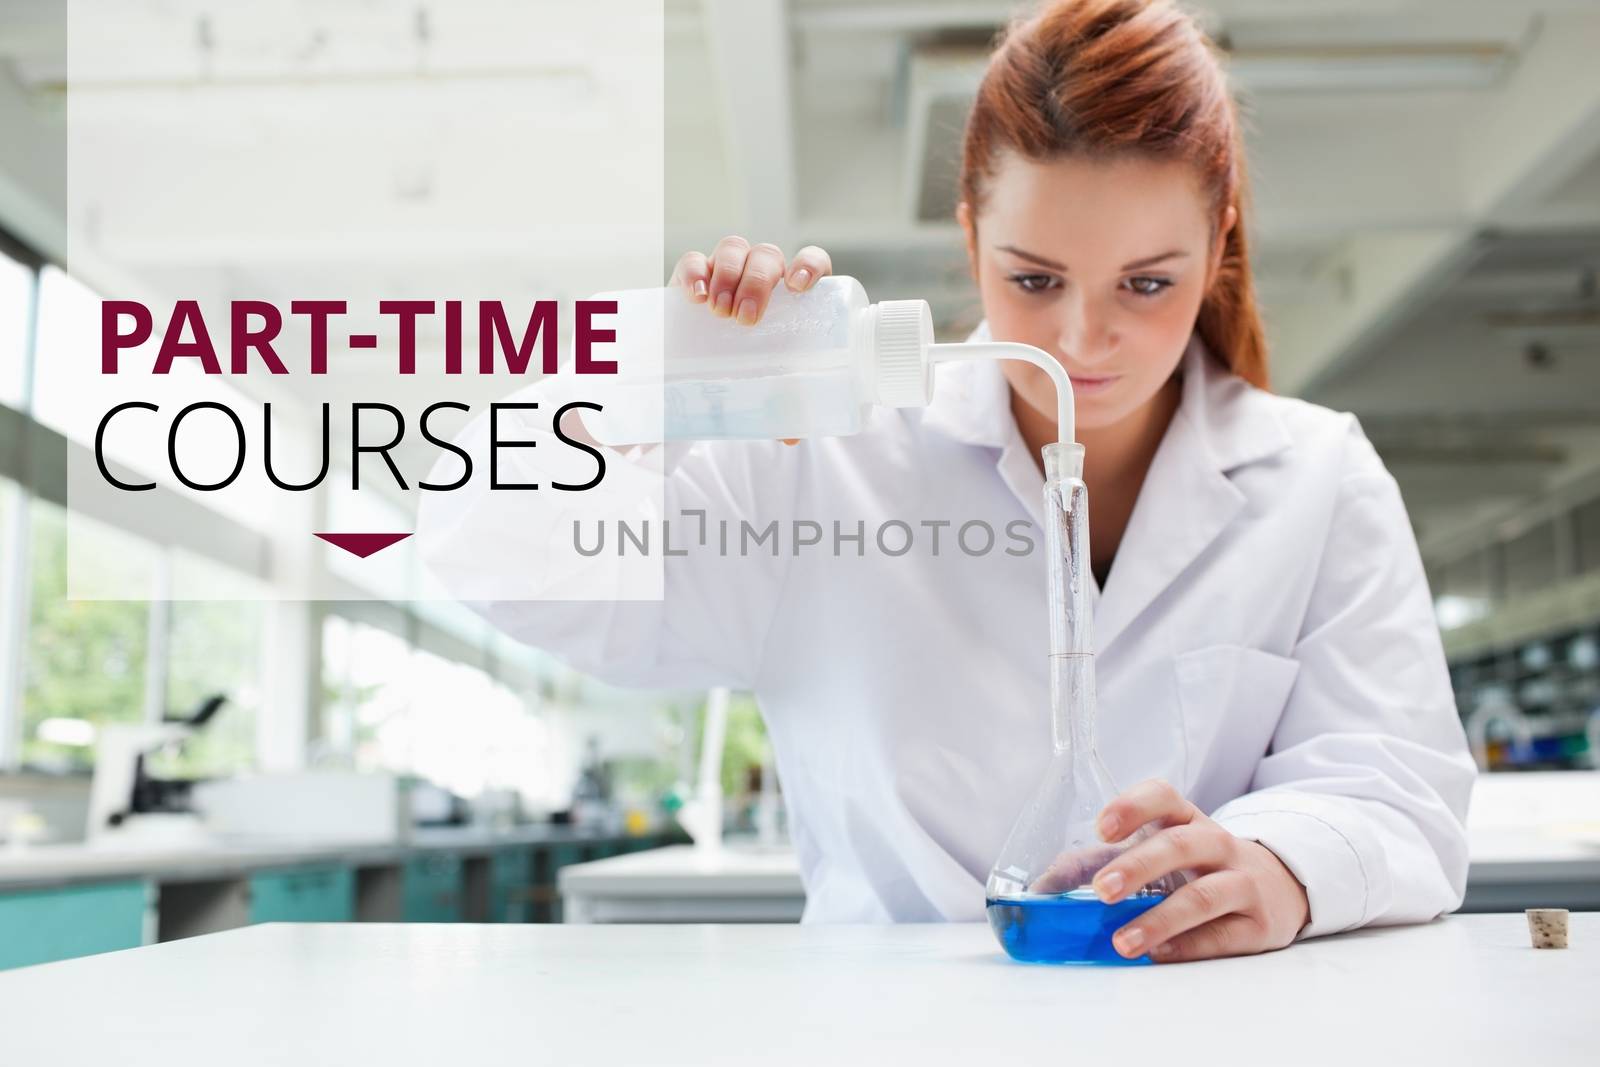 Education and part-time courses text and woman working at a laboratory by Wavebreakmedia